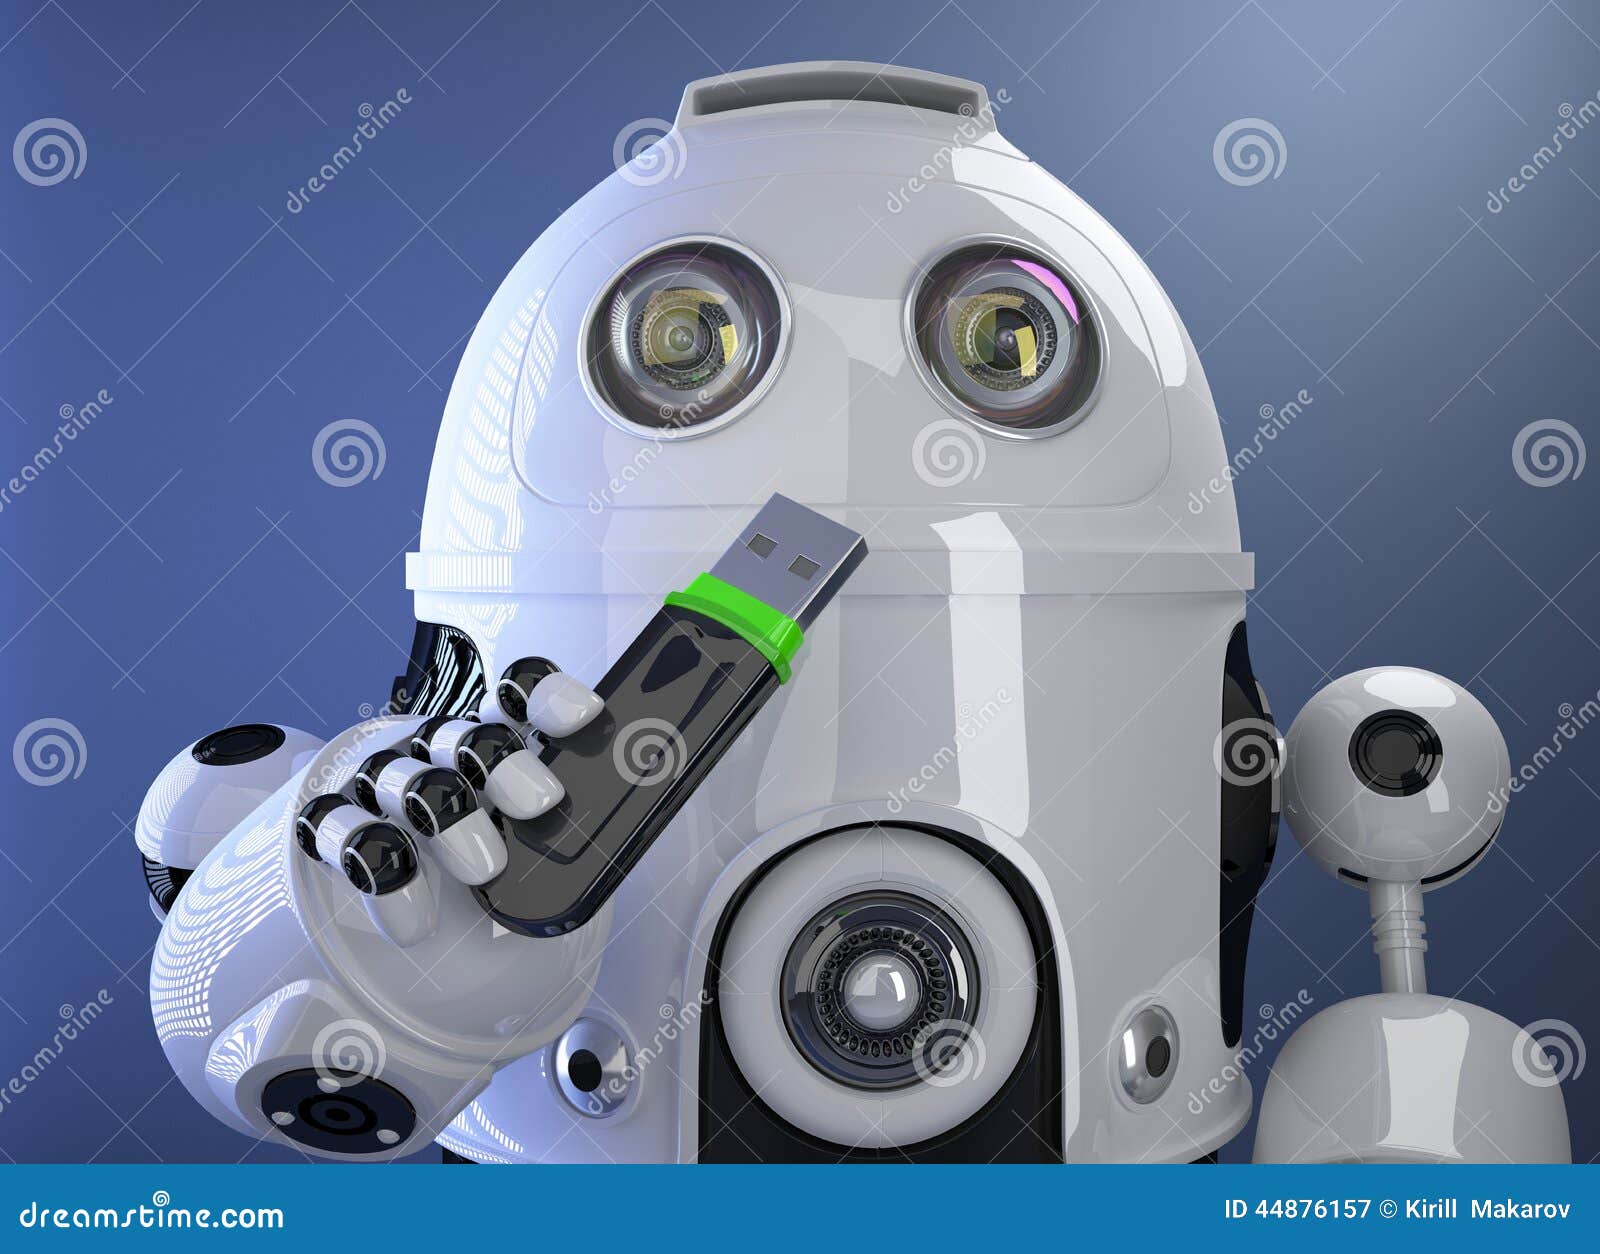 robot holding usb memory stick. contains clipping path